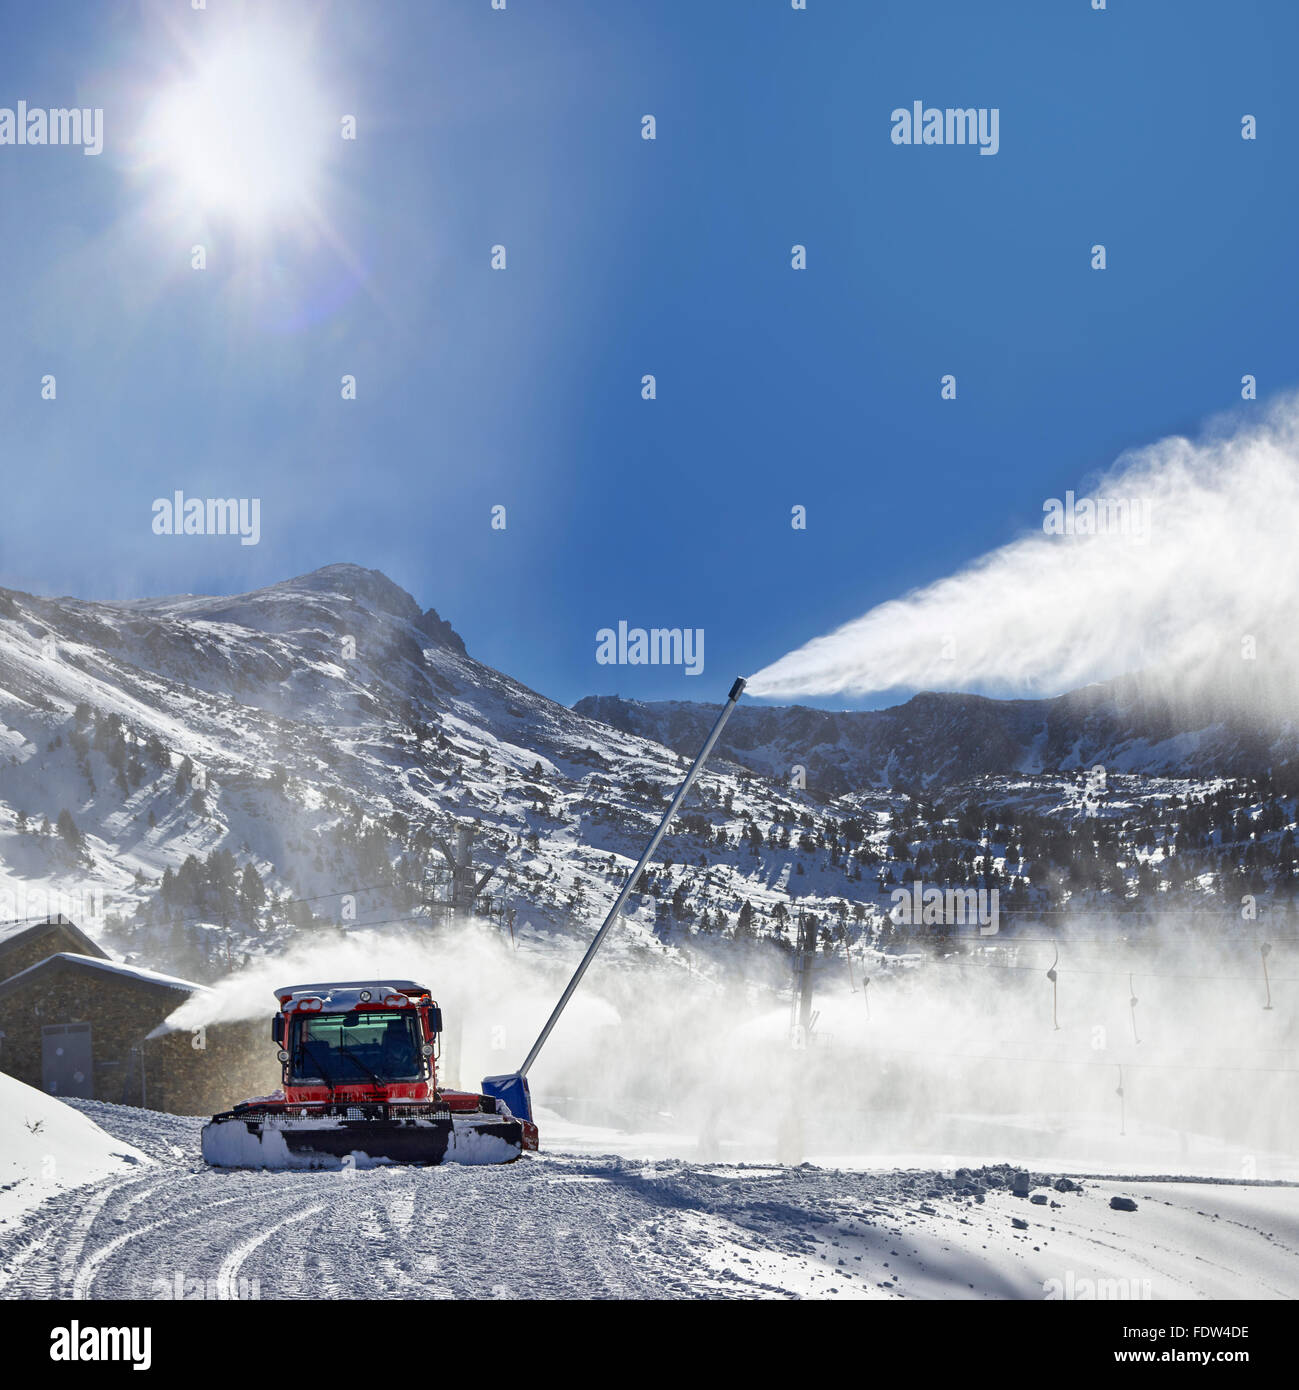 Preparation of ski resort in Pyrenees by red ratrack vehicle and snow canon Stock Photo